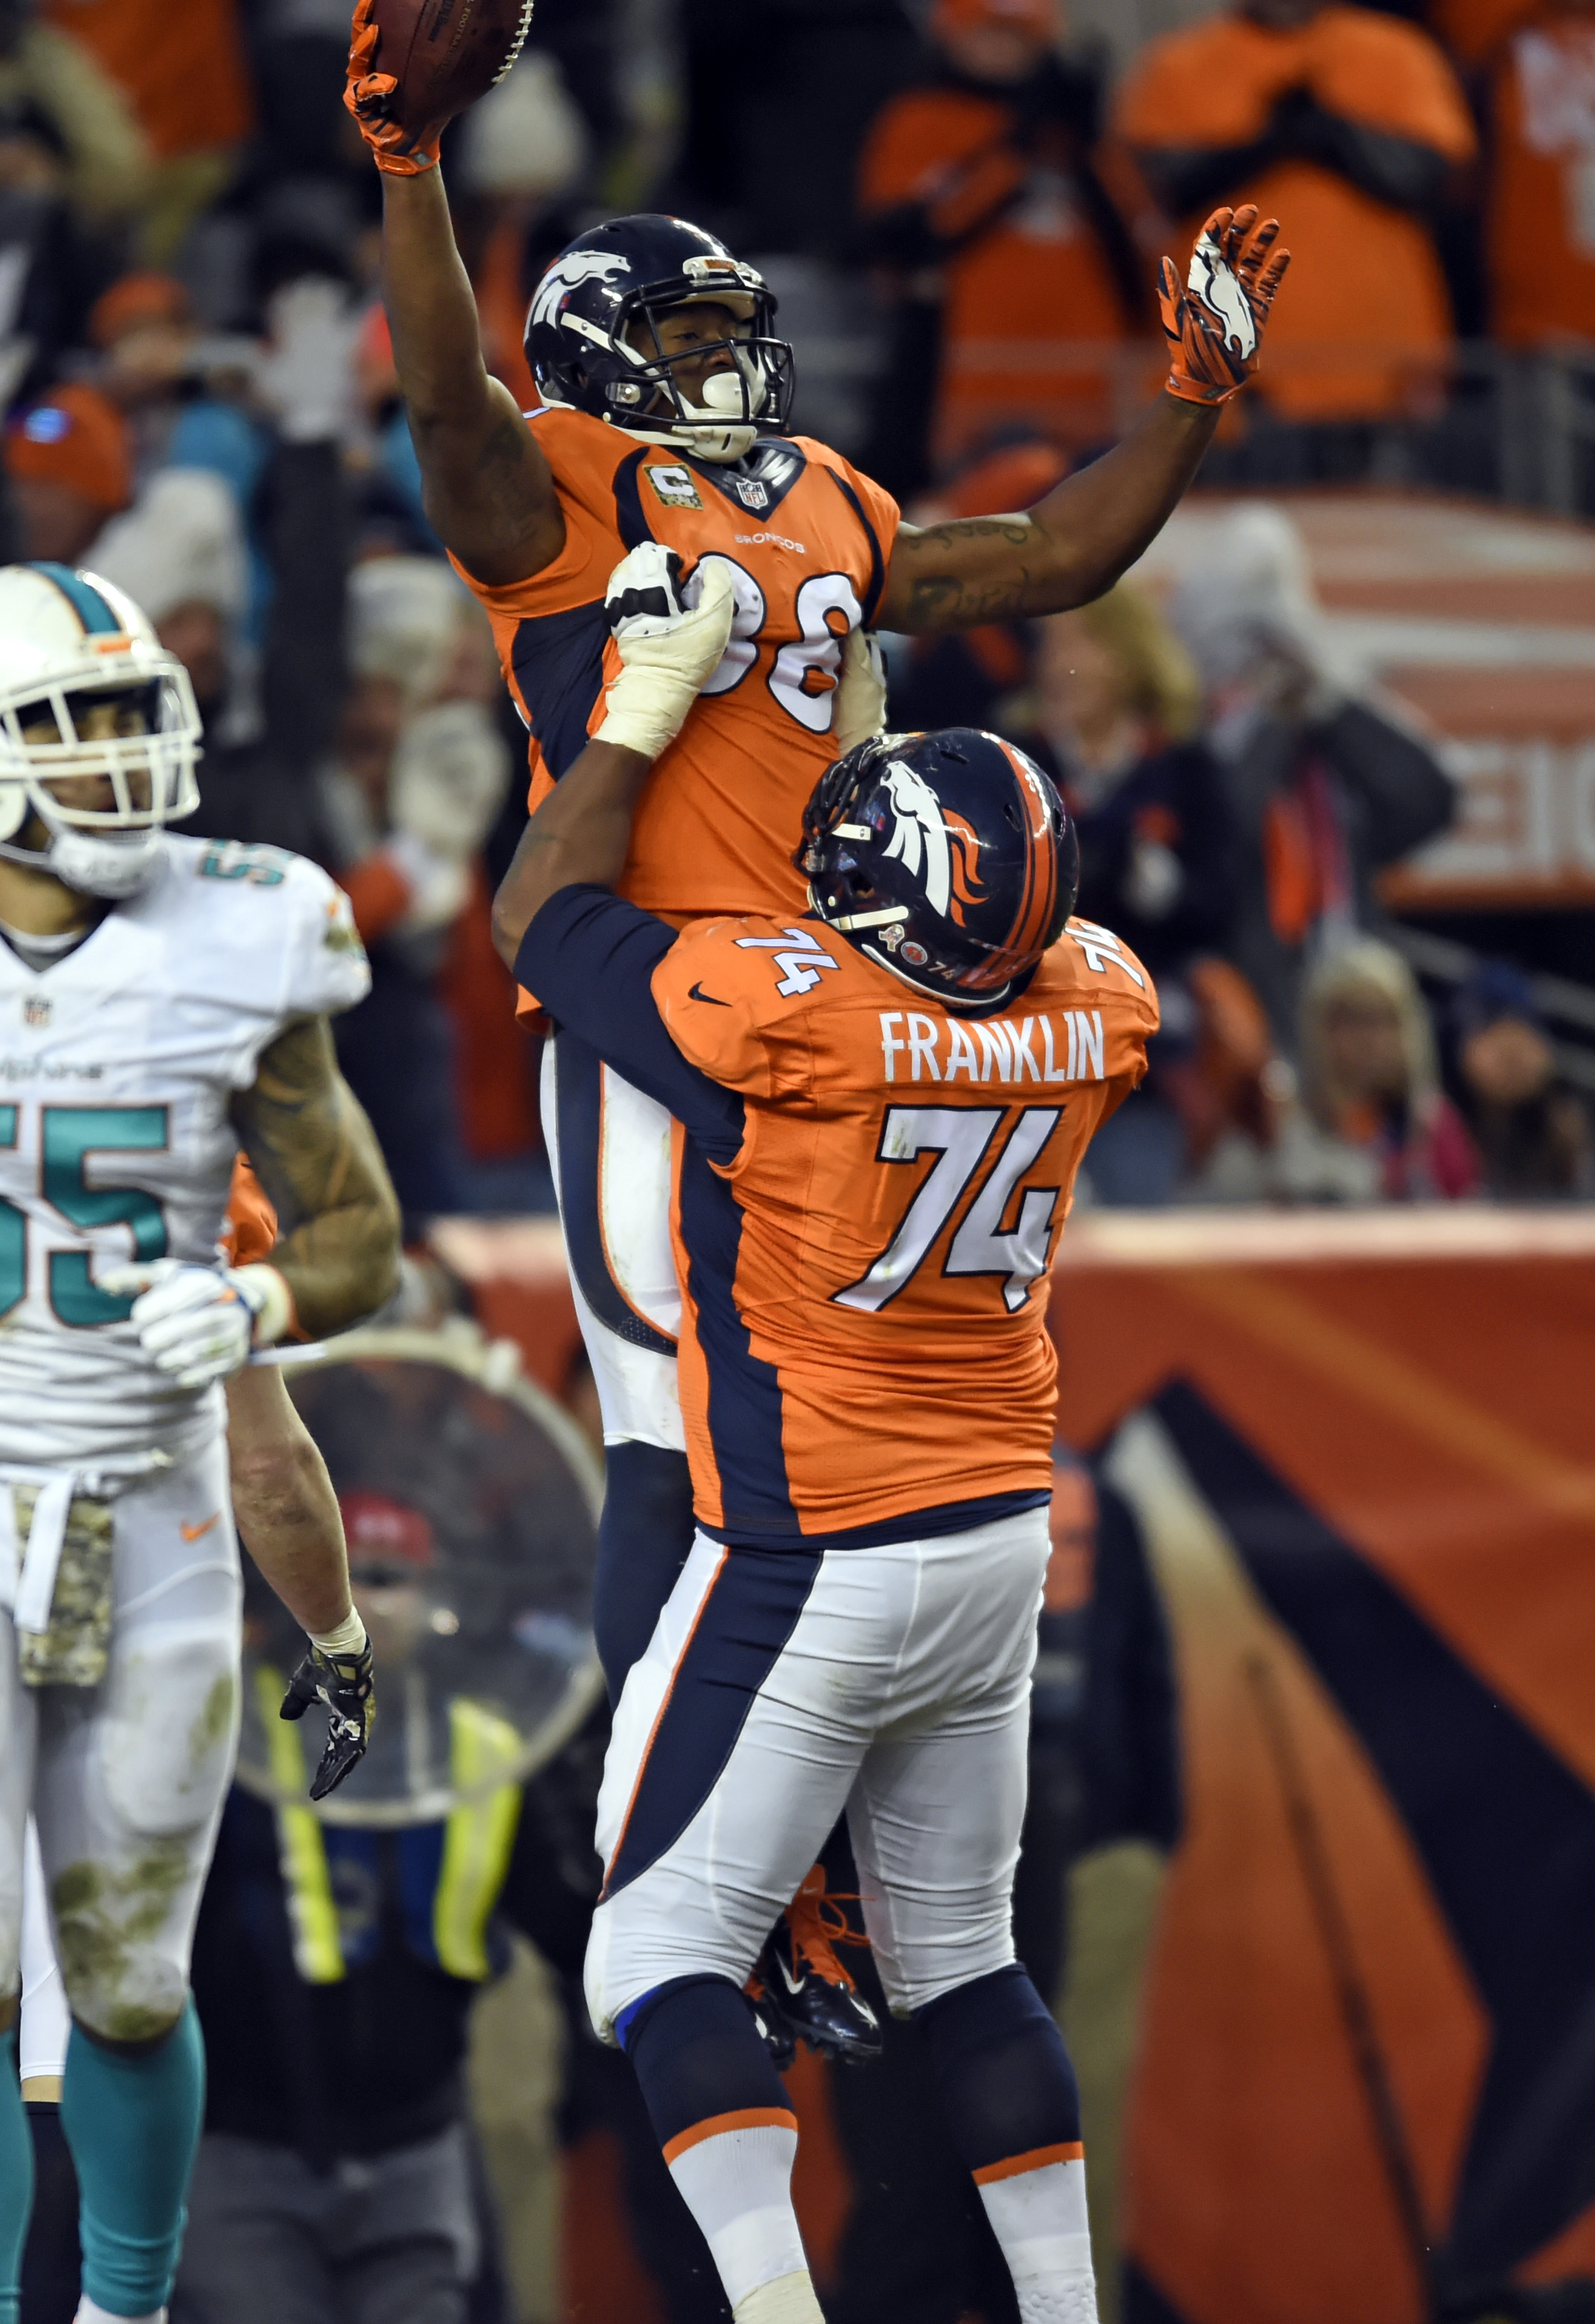 Denver Broncos wide receiver Demaryius Thomas celebrates his touchdown catch with guard Orlando Franklin in the fourth quarter against the Miami Dolphins at Sports Authority Field at Mile High. (Ron Chenoy-USA TODAY Sports)